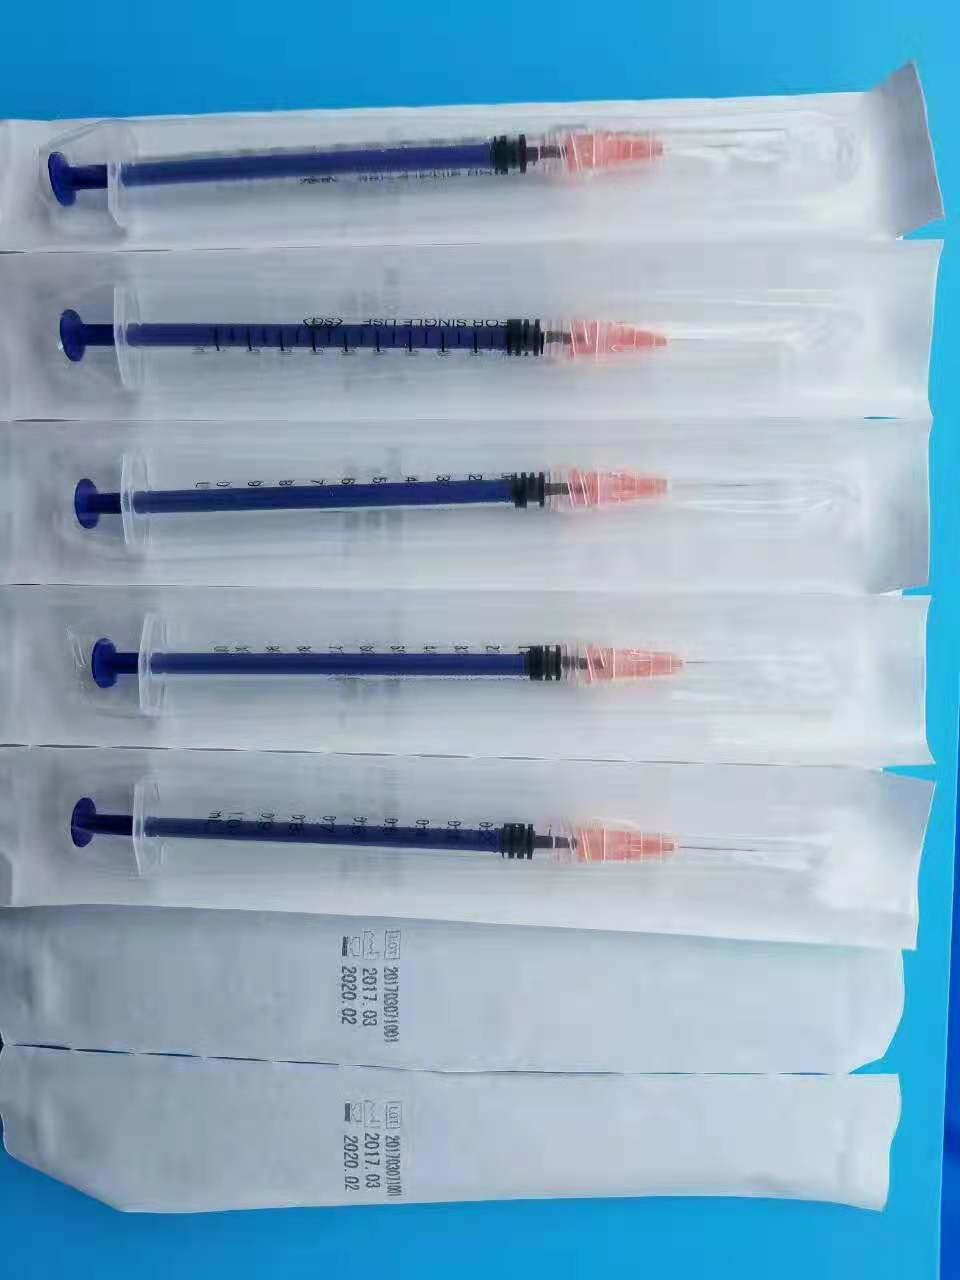 Disable Syringe for Single Use 0.5ml-100ml with Needle CE